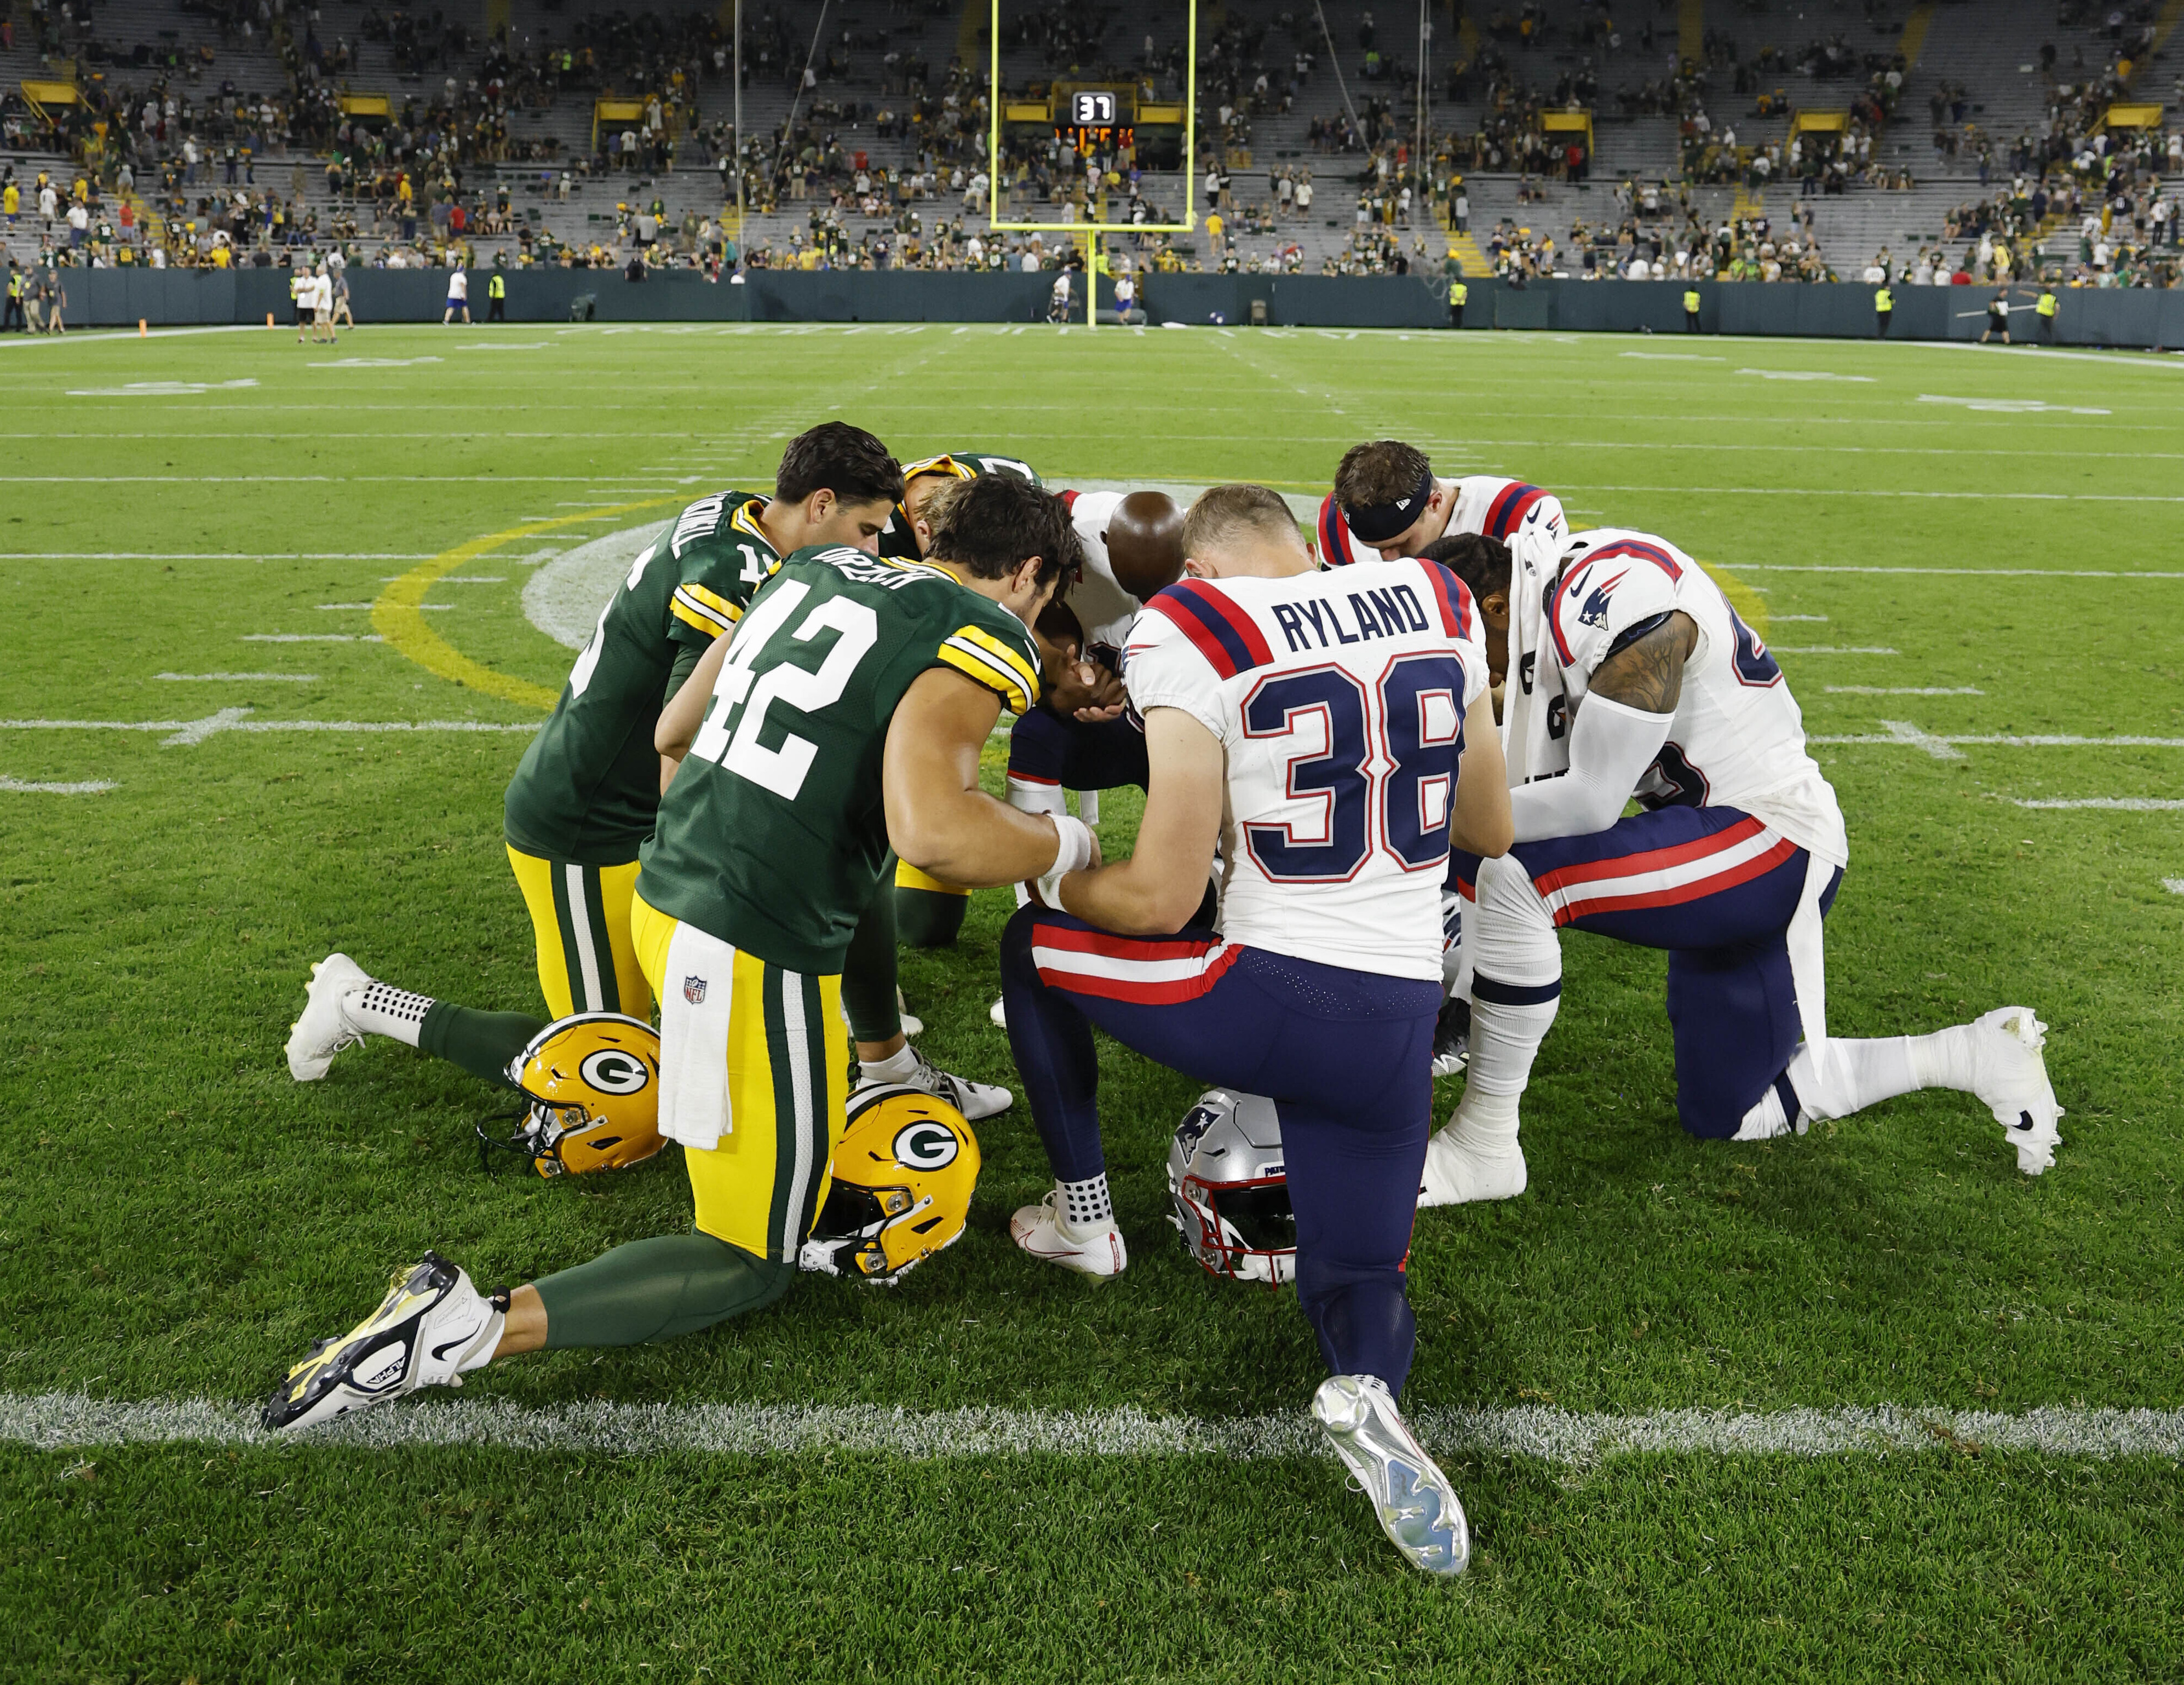 Why was Patriots vs. Packers preseason game suspended? Here's what